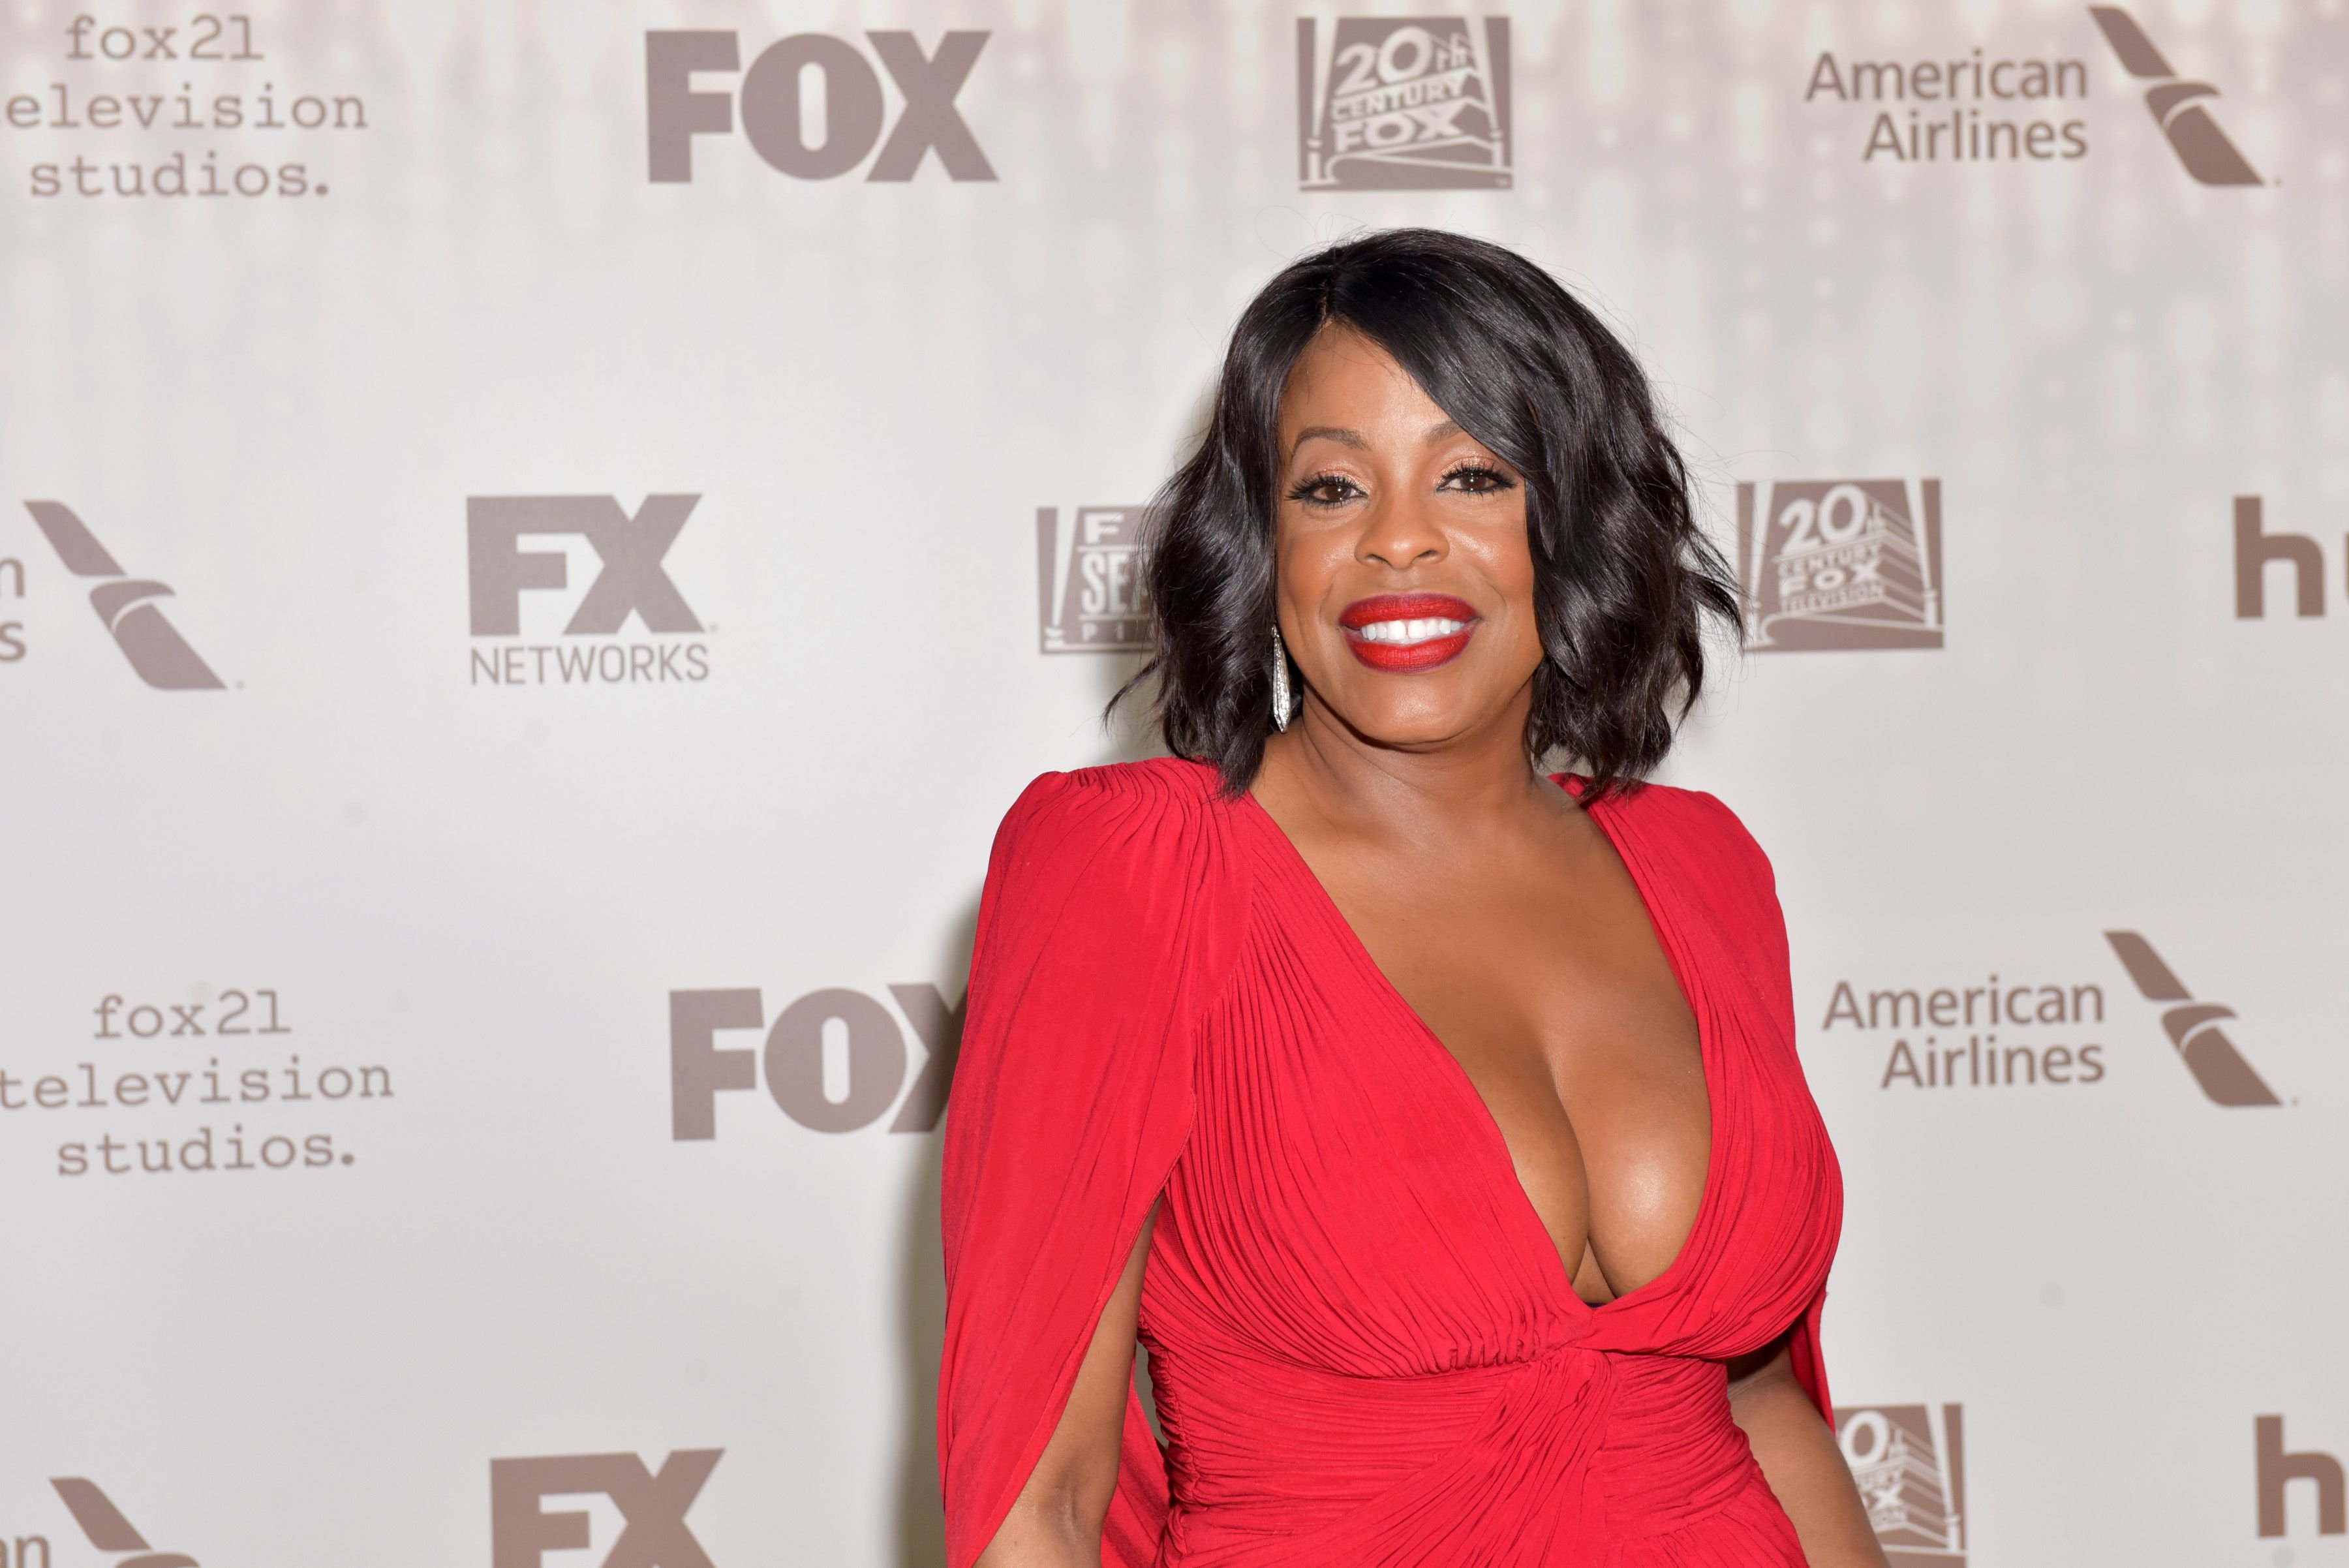 Niecy Nash during FOX and FX's 2017 Golden Globe Awards after party at The Beverly Hilton Hotel on January 8, 2017 in Beverly Hills, California. | Source: Getty Images